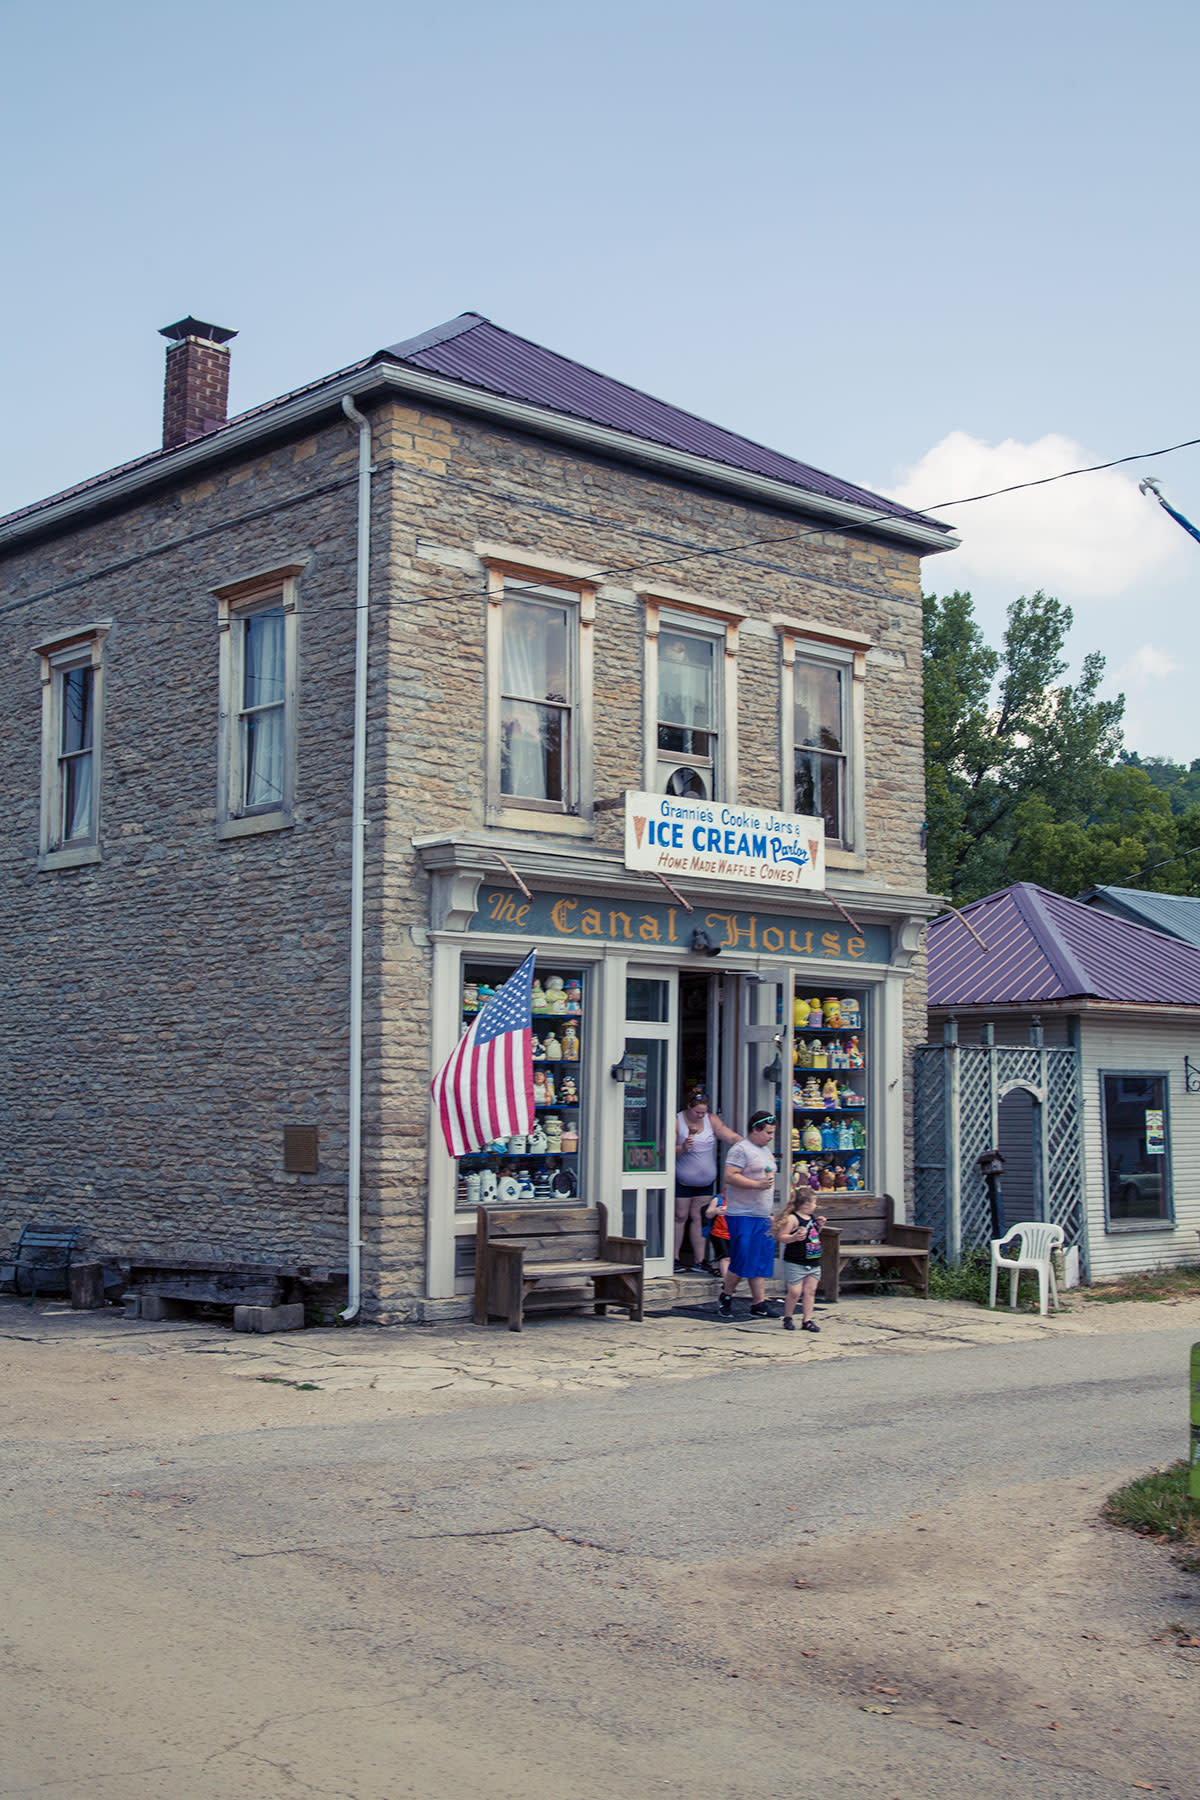 Canal House - one of the many historic structures in Metamora